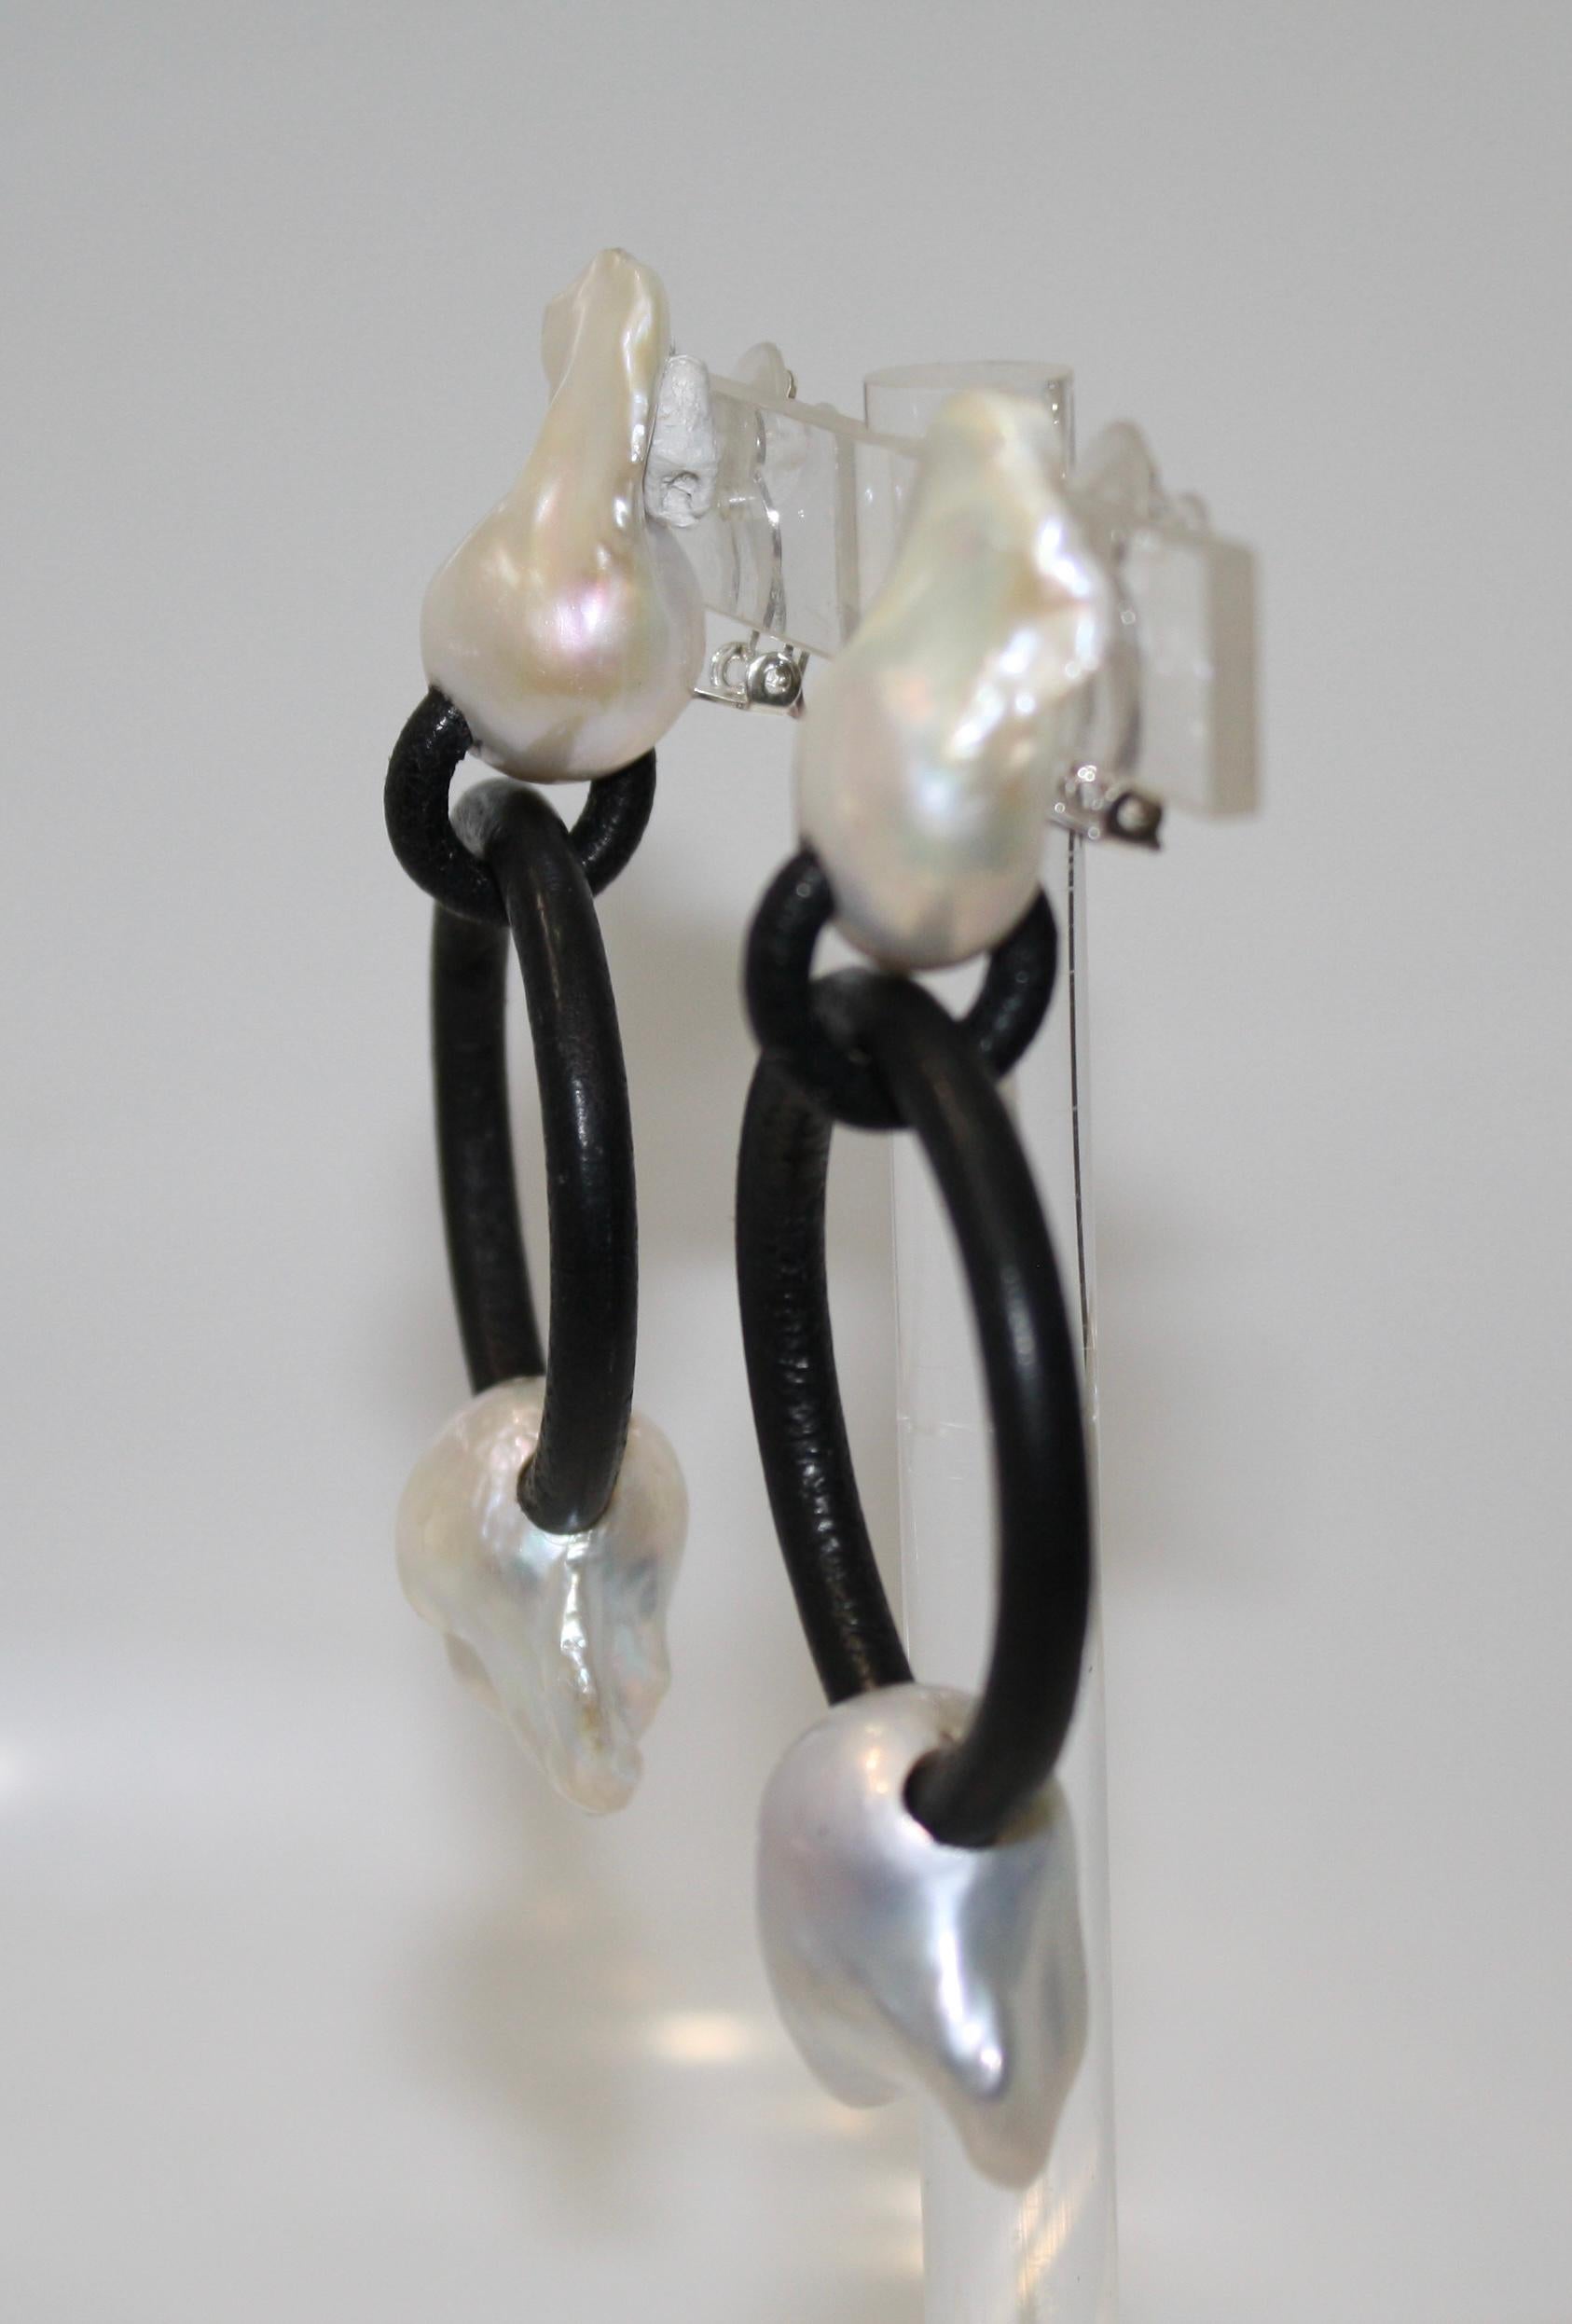 Clip earrings with baroque pearl on the top and leather hoop with threaded pearl. The shape and form of the pearls vary since the are unique and no pearls are the same.
Top pearls are 1.5” long, 1” wide
MONIES IS A DANISH JEWELLERY COMPANY FOUNDED